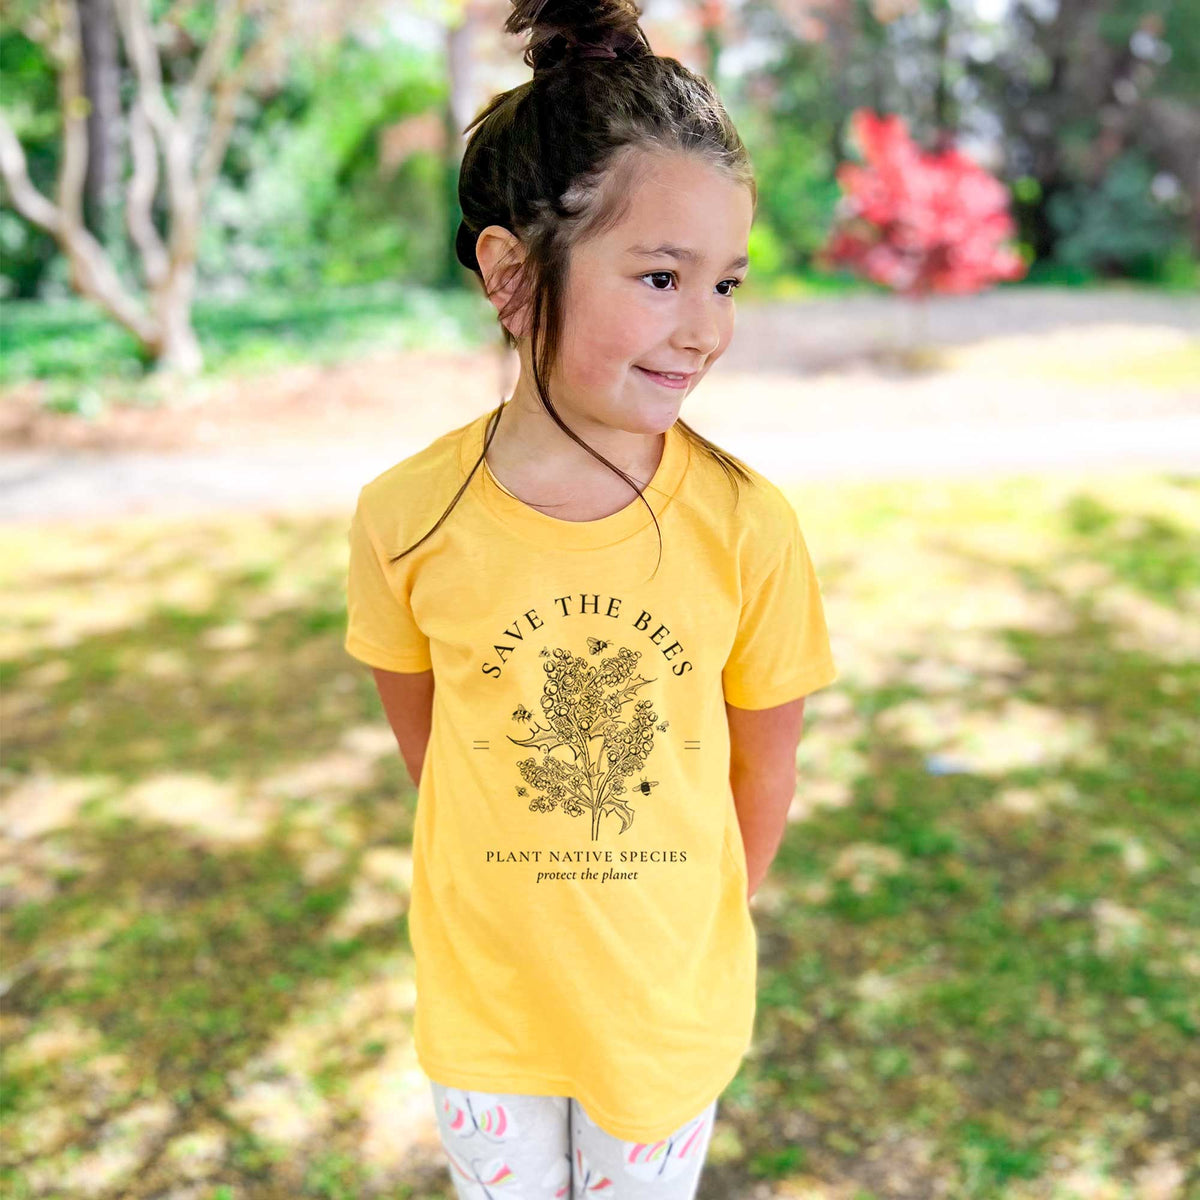 Save the Bees - Plant Native Species - Kids Shirt